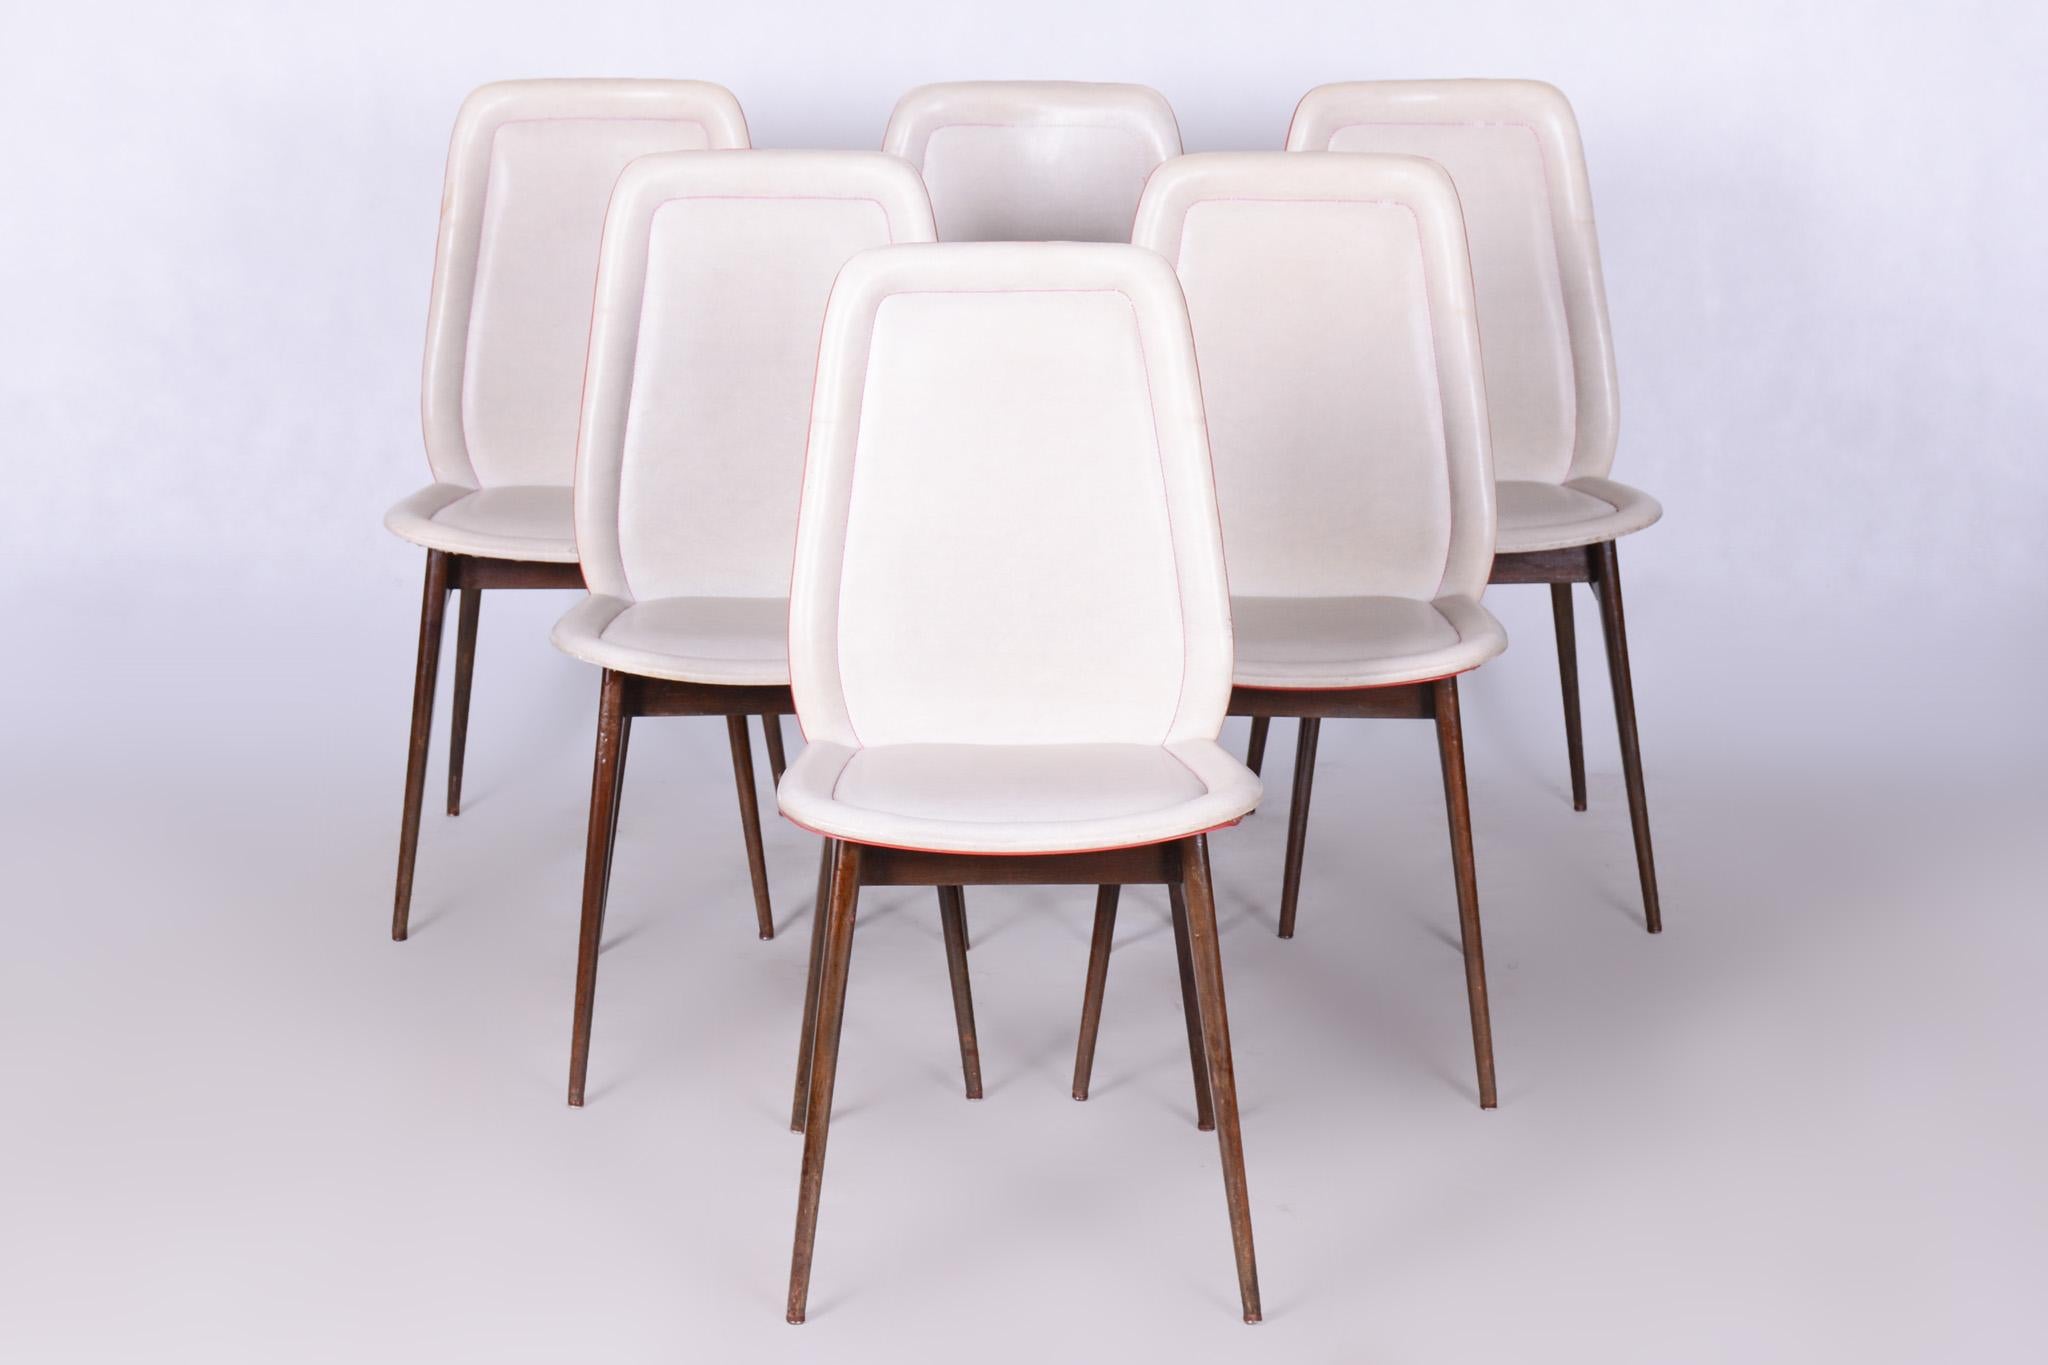 Set of six Art Deco chairs

Origin: France
Period: 1940-1949
Very well preserved original condition.

Designed by Jules Leleu, a French designer at the top of French 20th Century decoration who distinguished himself during the Art Deco style's